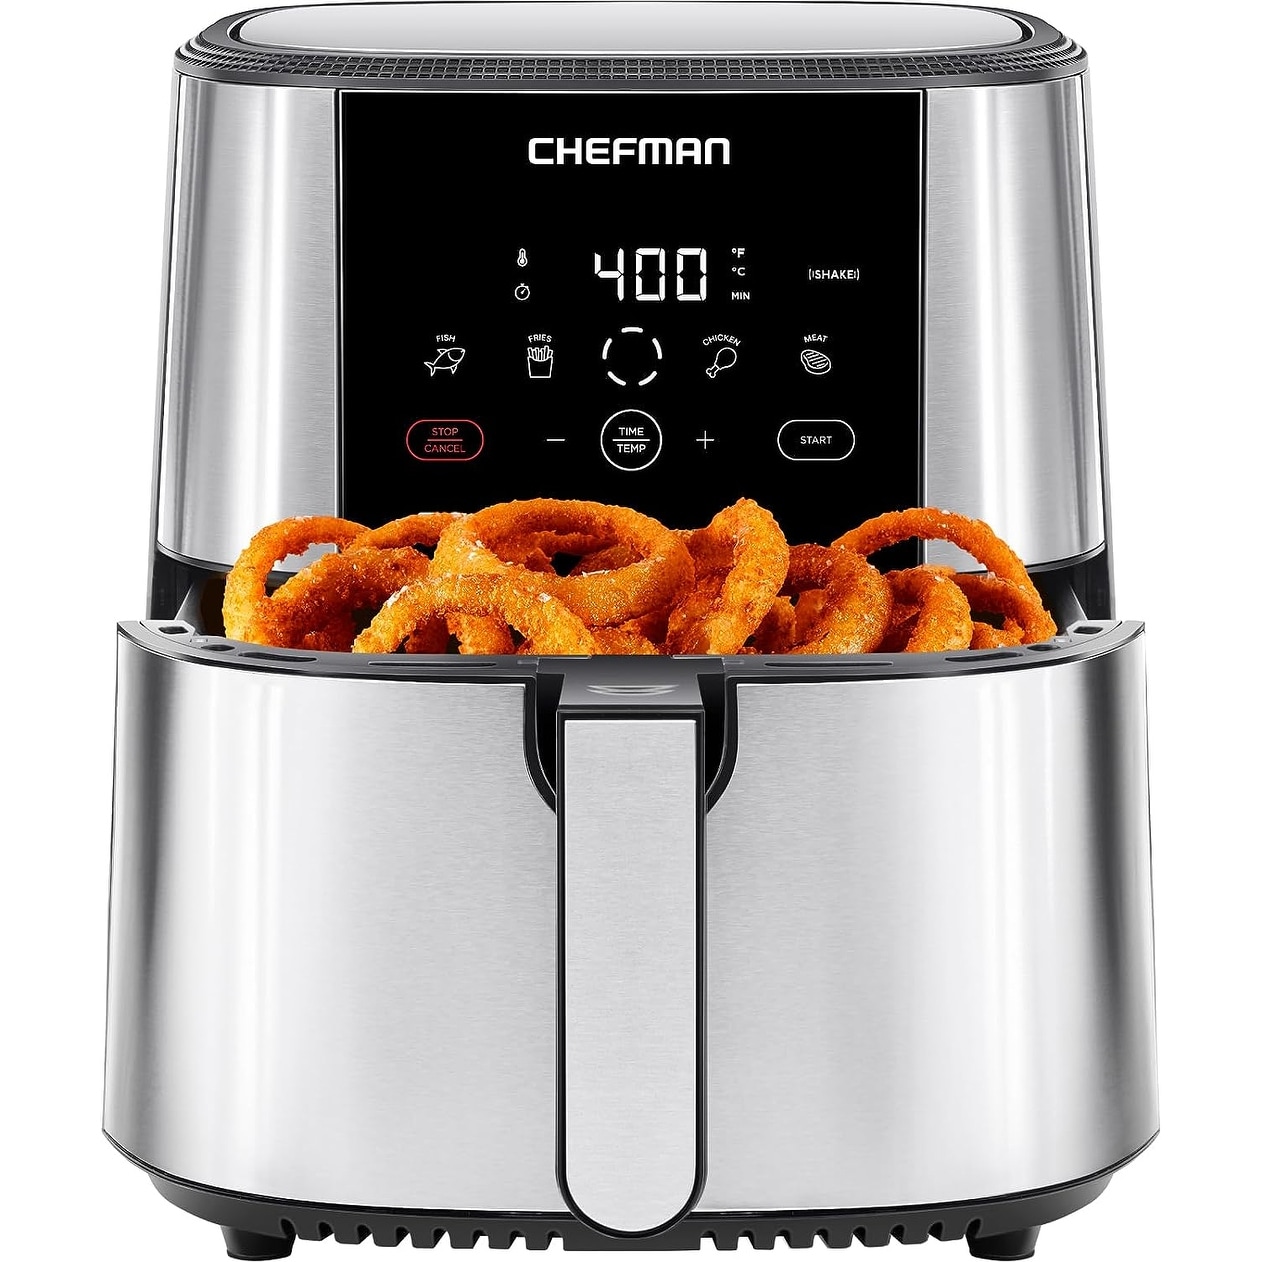 https://ak1.ostkcdn.com/images/products/is/images/direct/dc3e7a4ebee67bb3f2a4800ed1e3a5c5c6a5086e/One-Touch-Air-Fryer.jpg